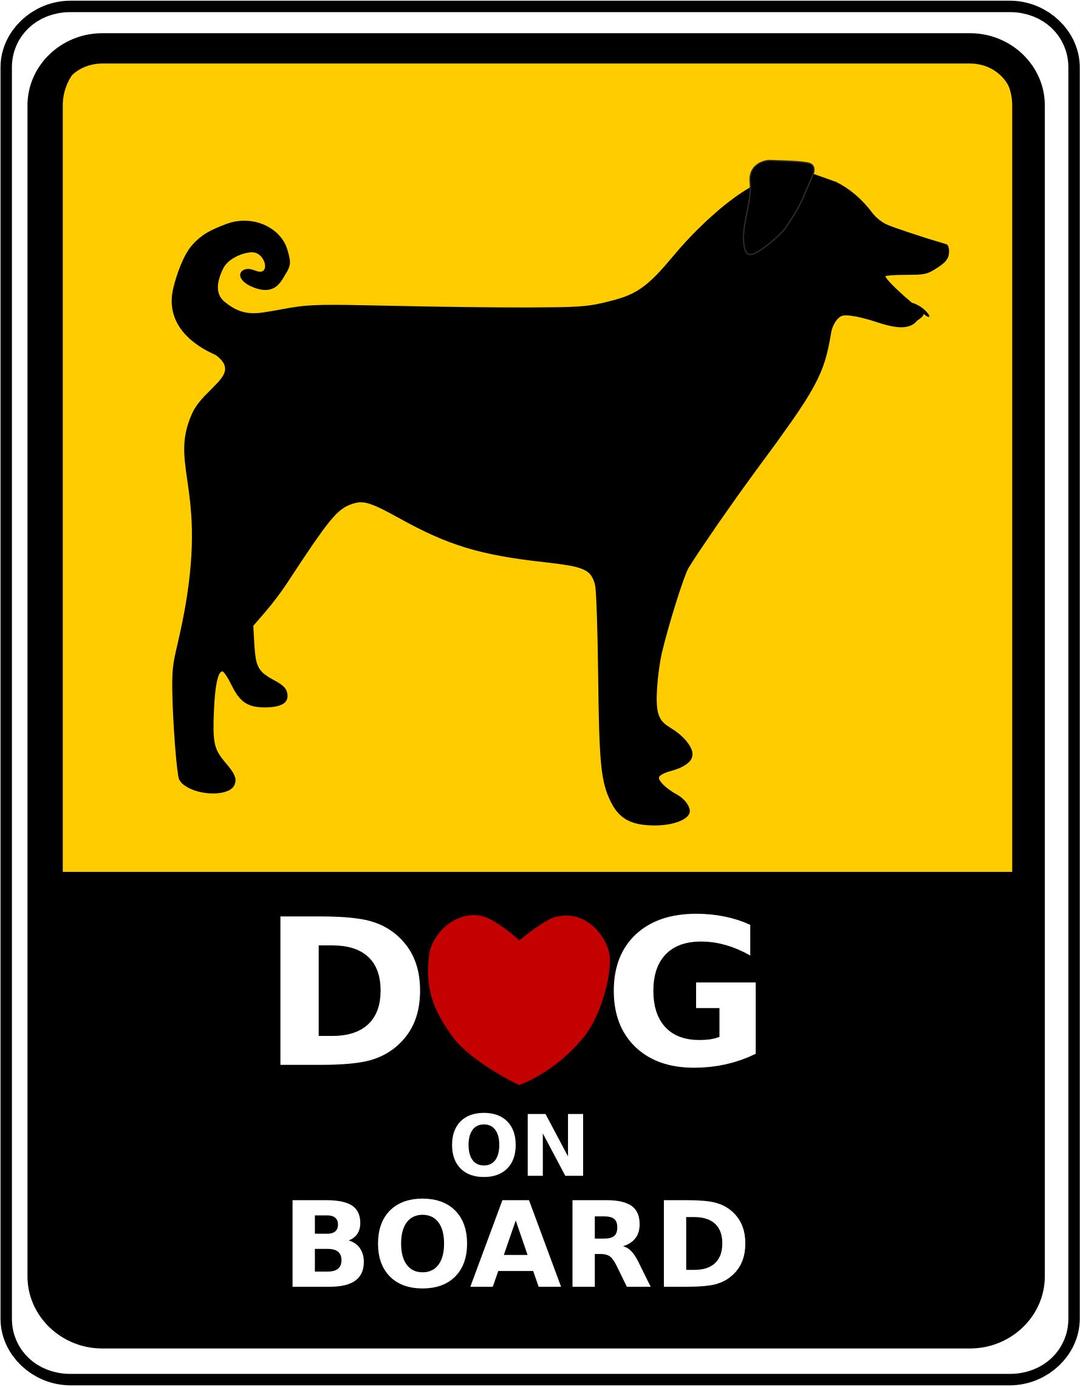 Dog on Board with floppy ears and curled tail png transparent